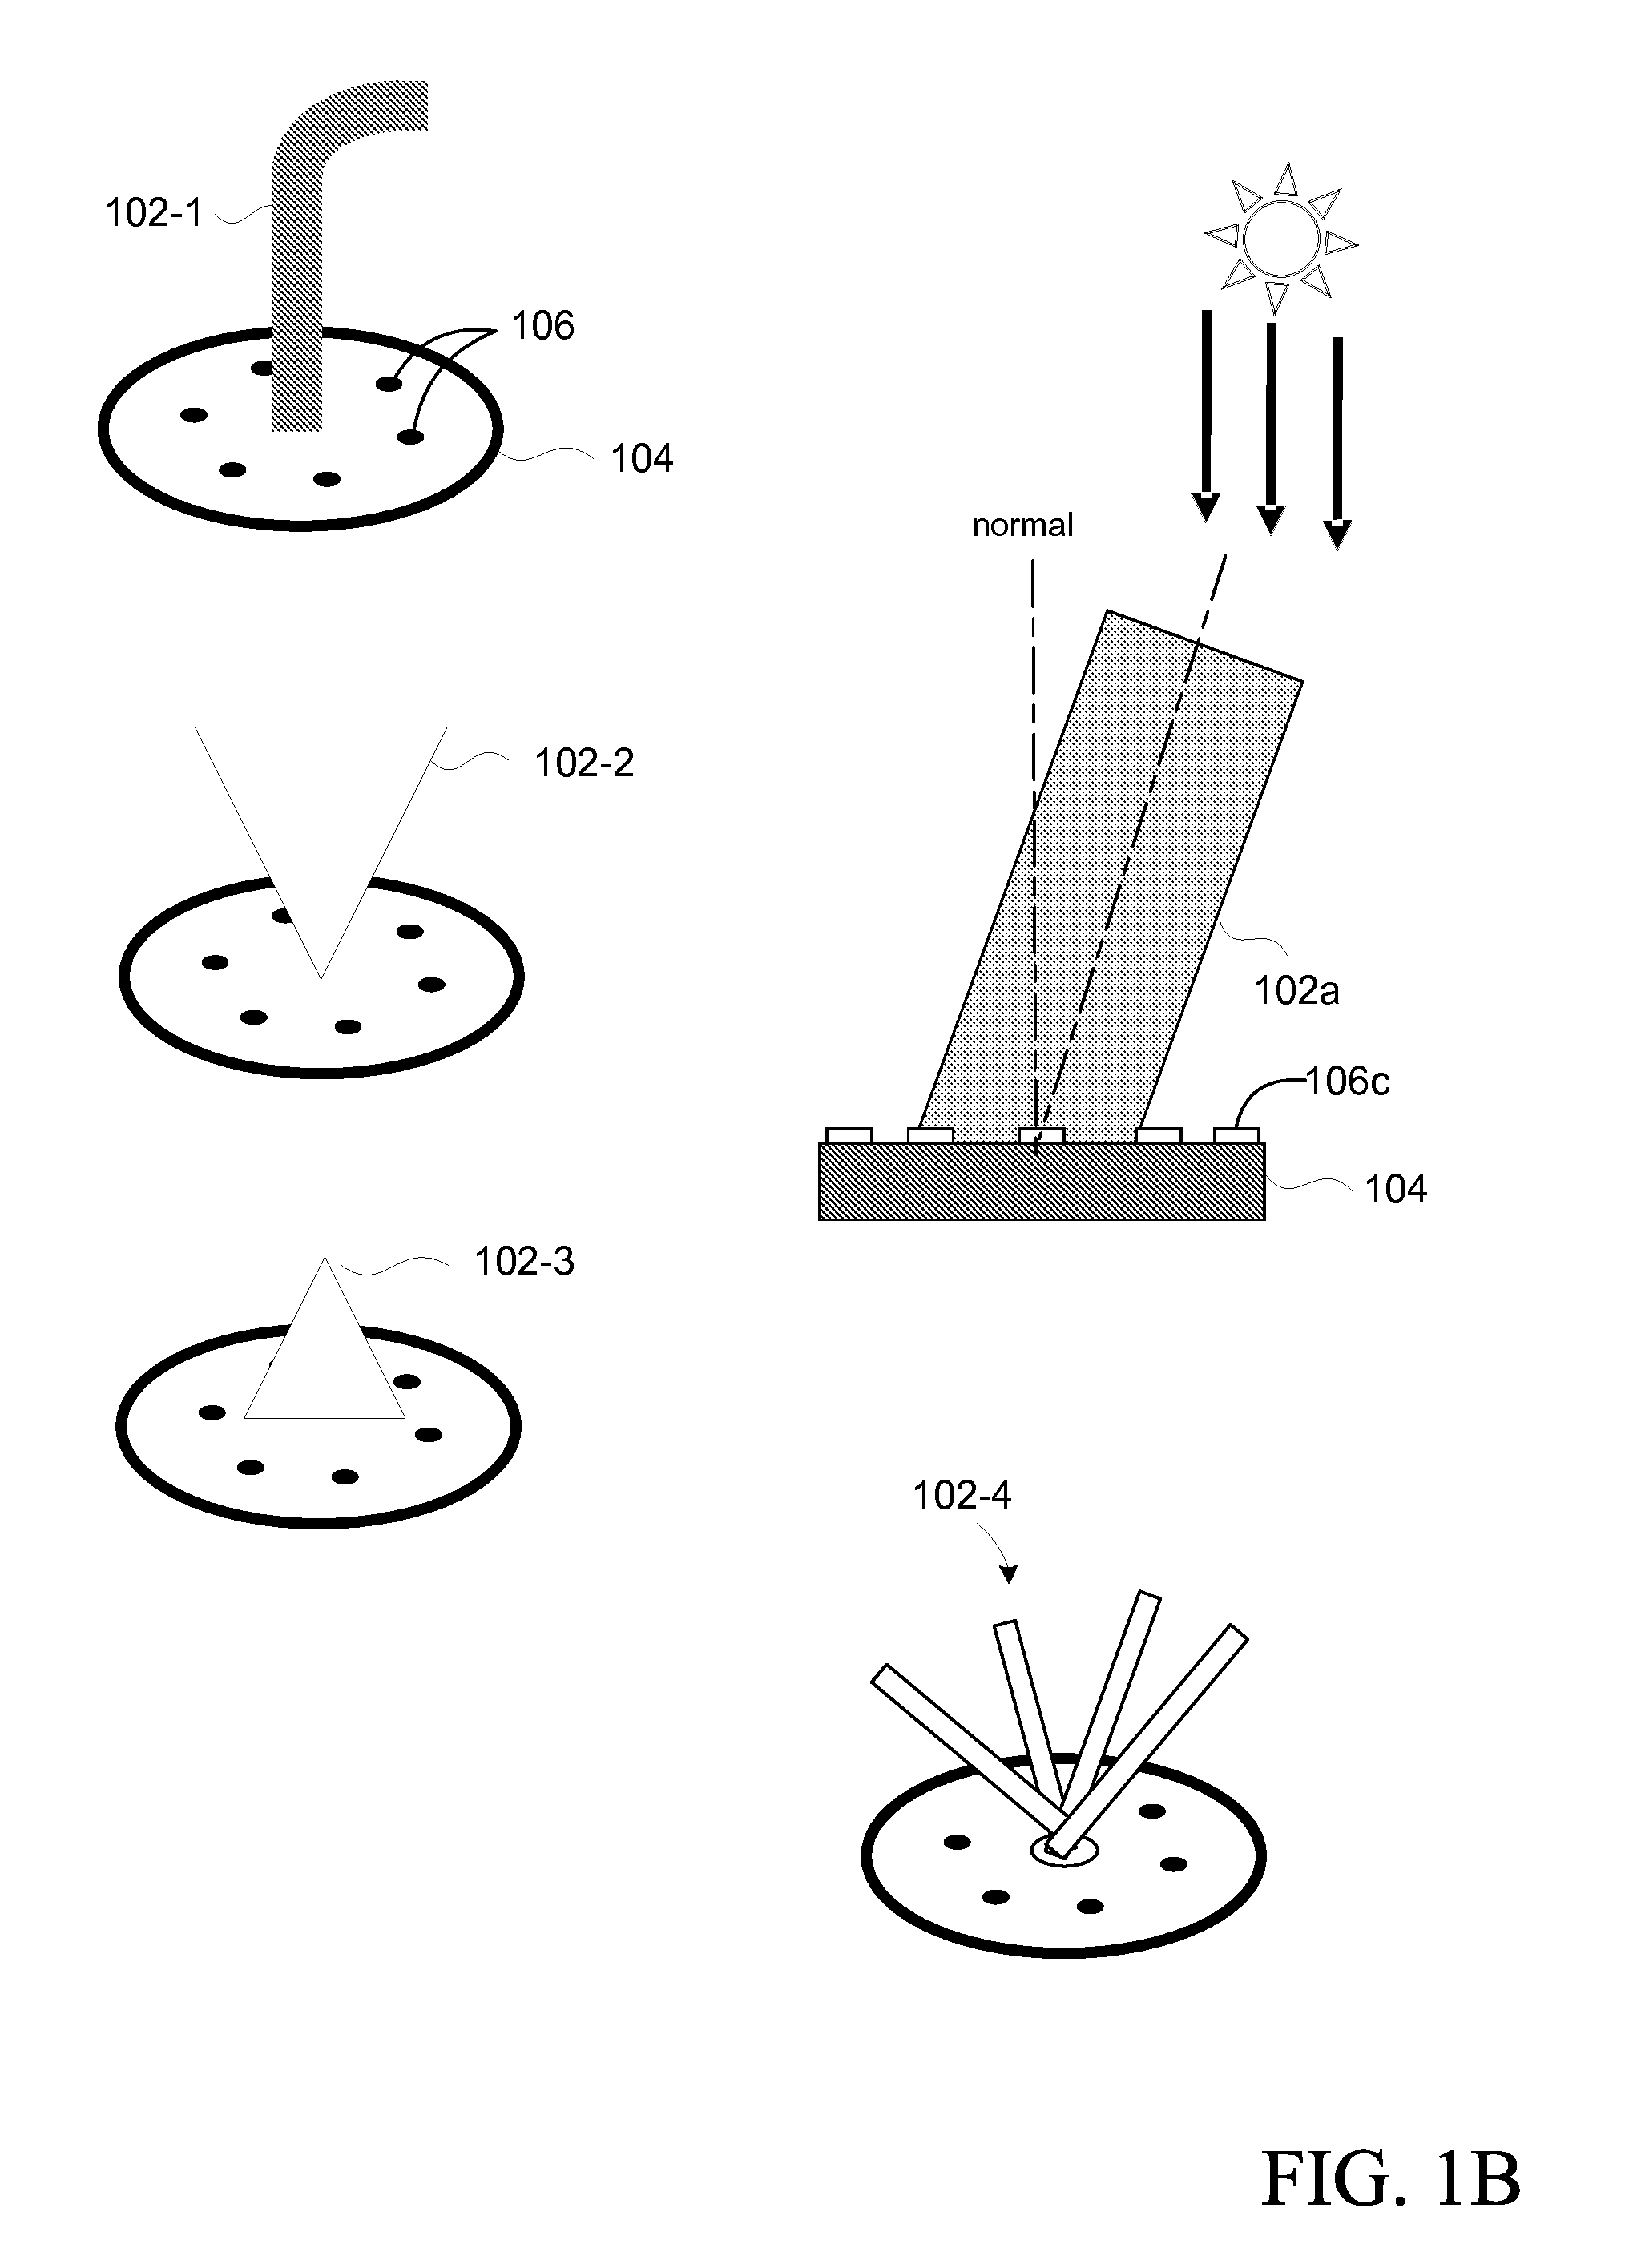 Direct, Diffuse, and Total Radiation Sensor